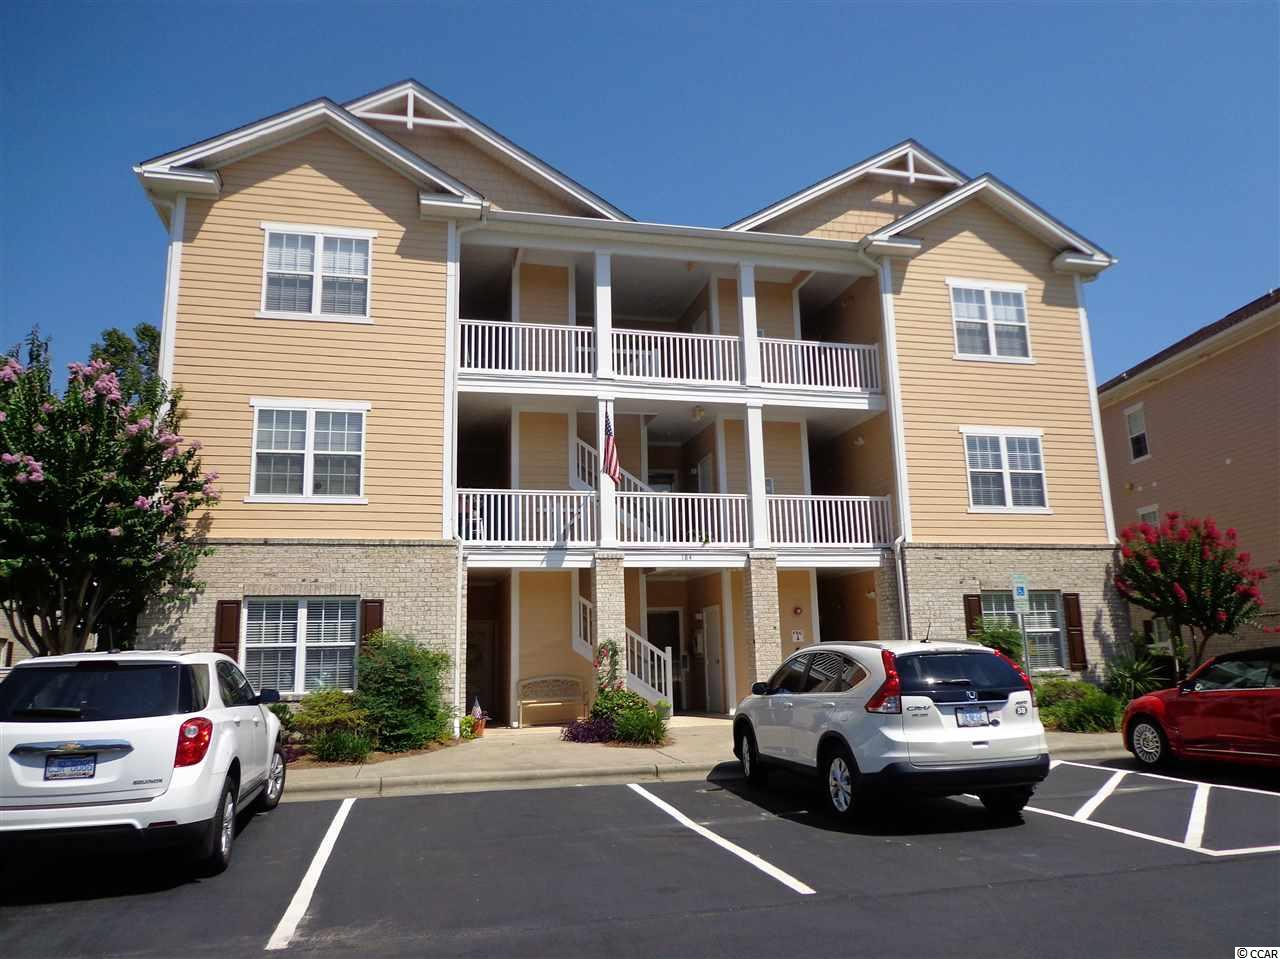 184 Clubhouse Rd. UNIT #3 Sunset Beach, NC 28468